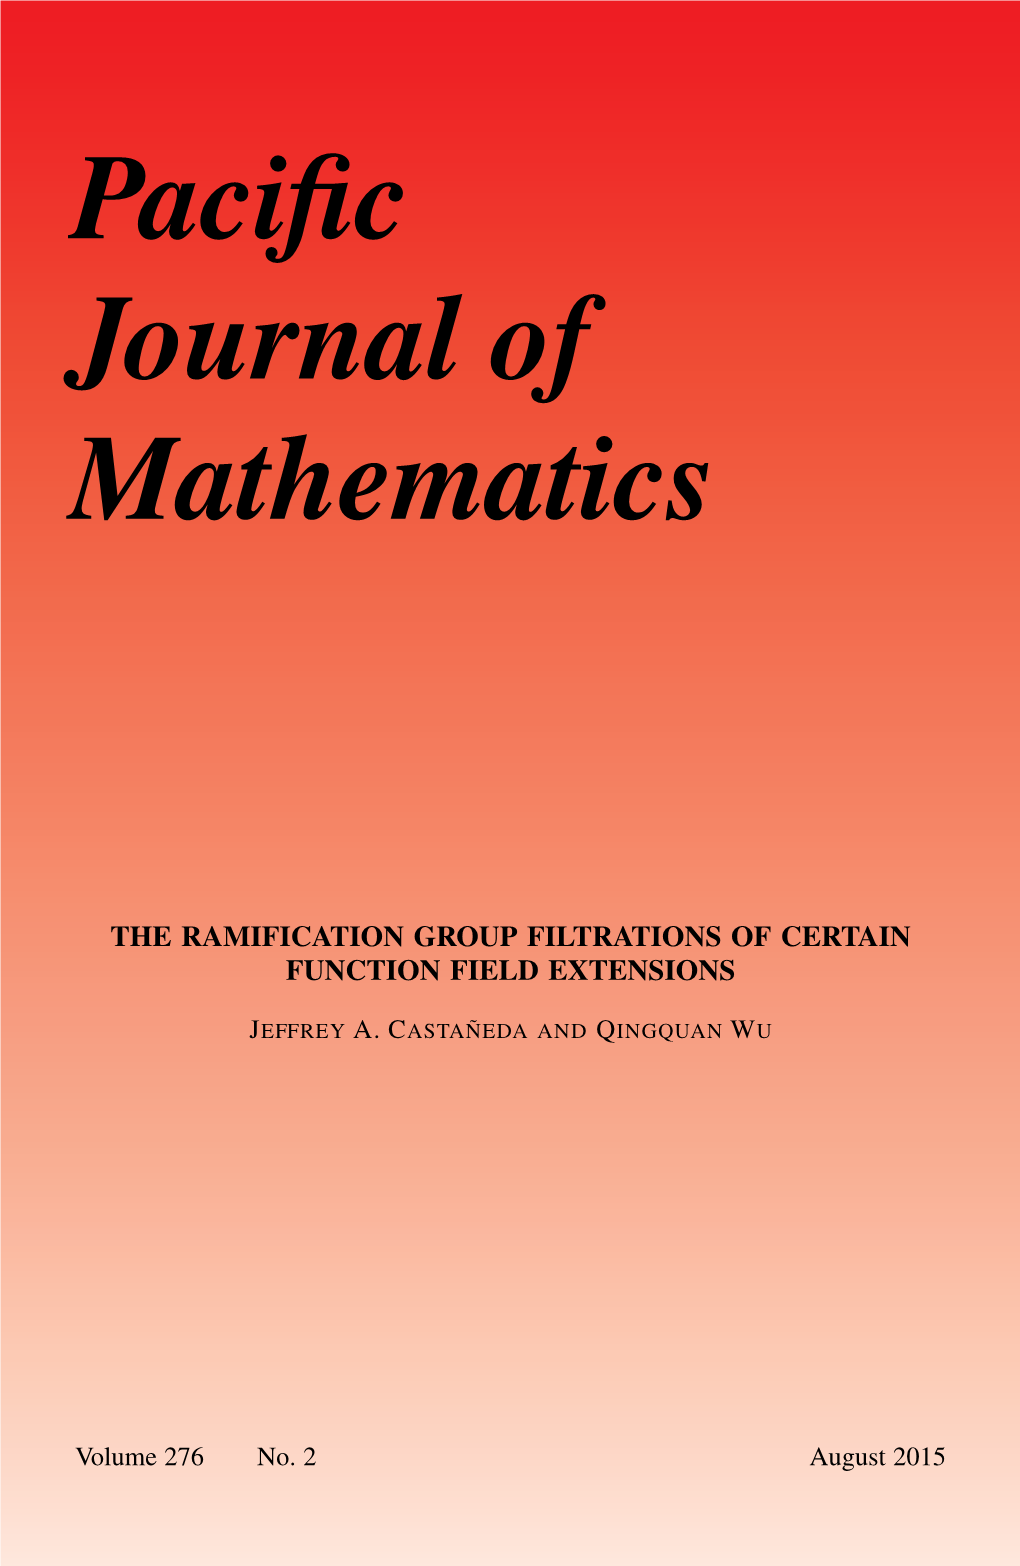 The Ramification Group Filtrations of Certain Function Field Extensions